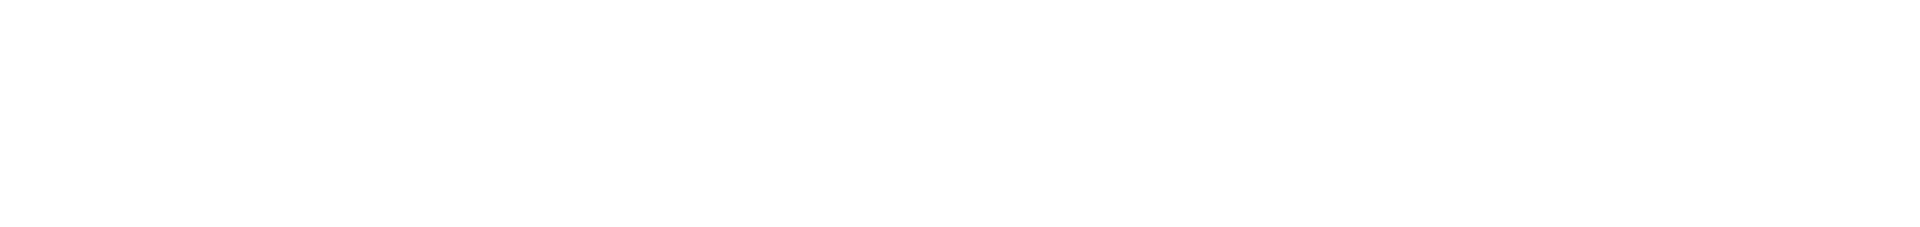 A green and white background with a wave